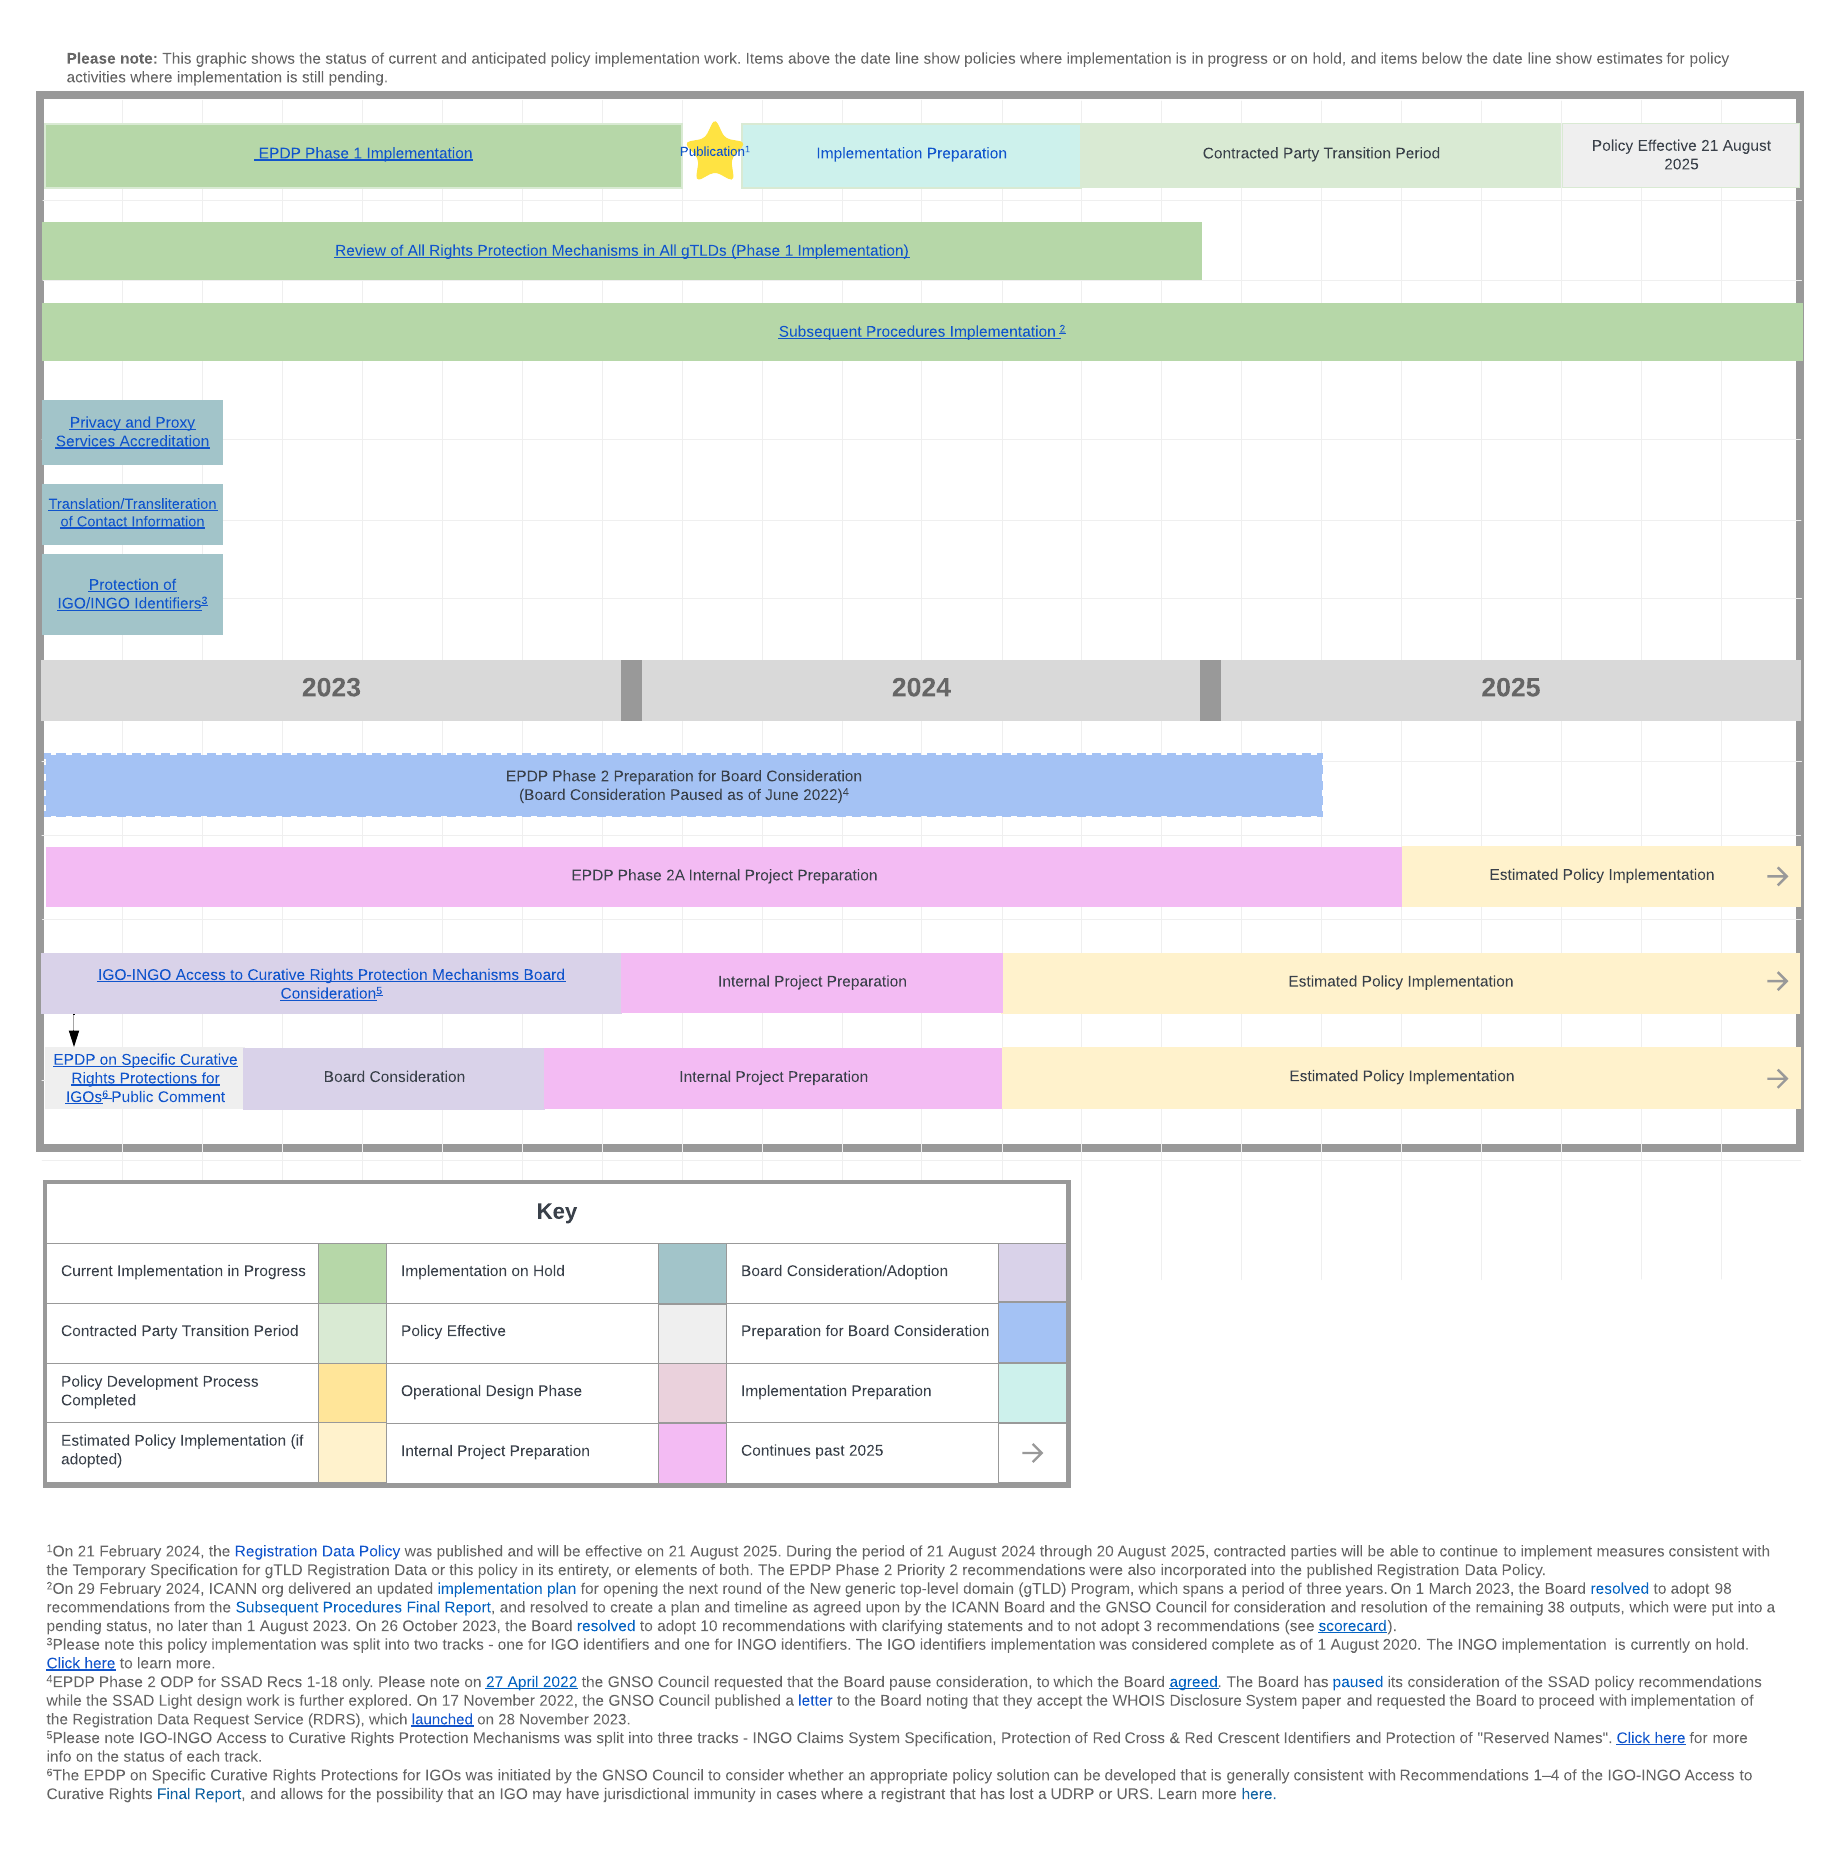 High Level Timeline showing ongoing Policy Development Processes and Implementation Projects from 2022-2024.